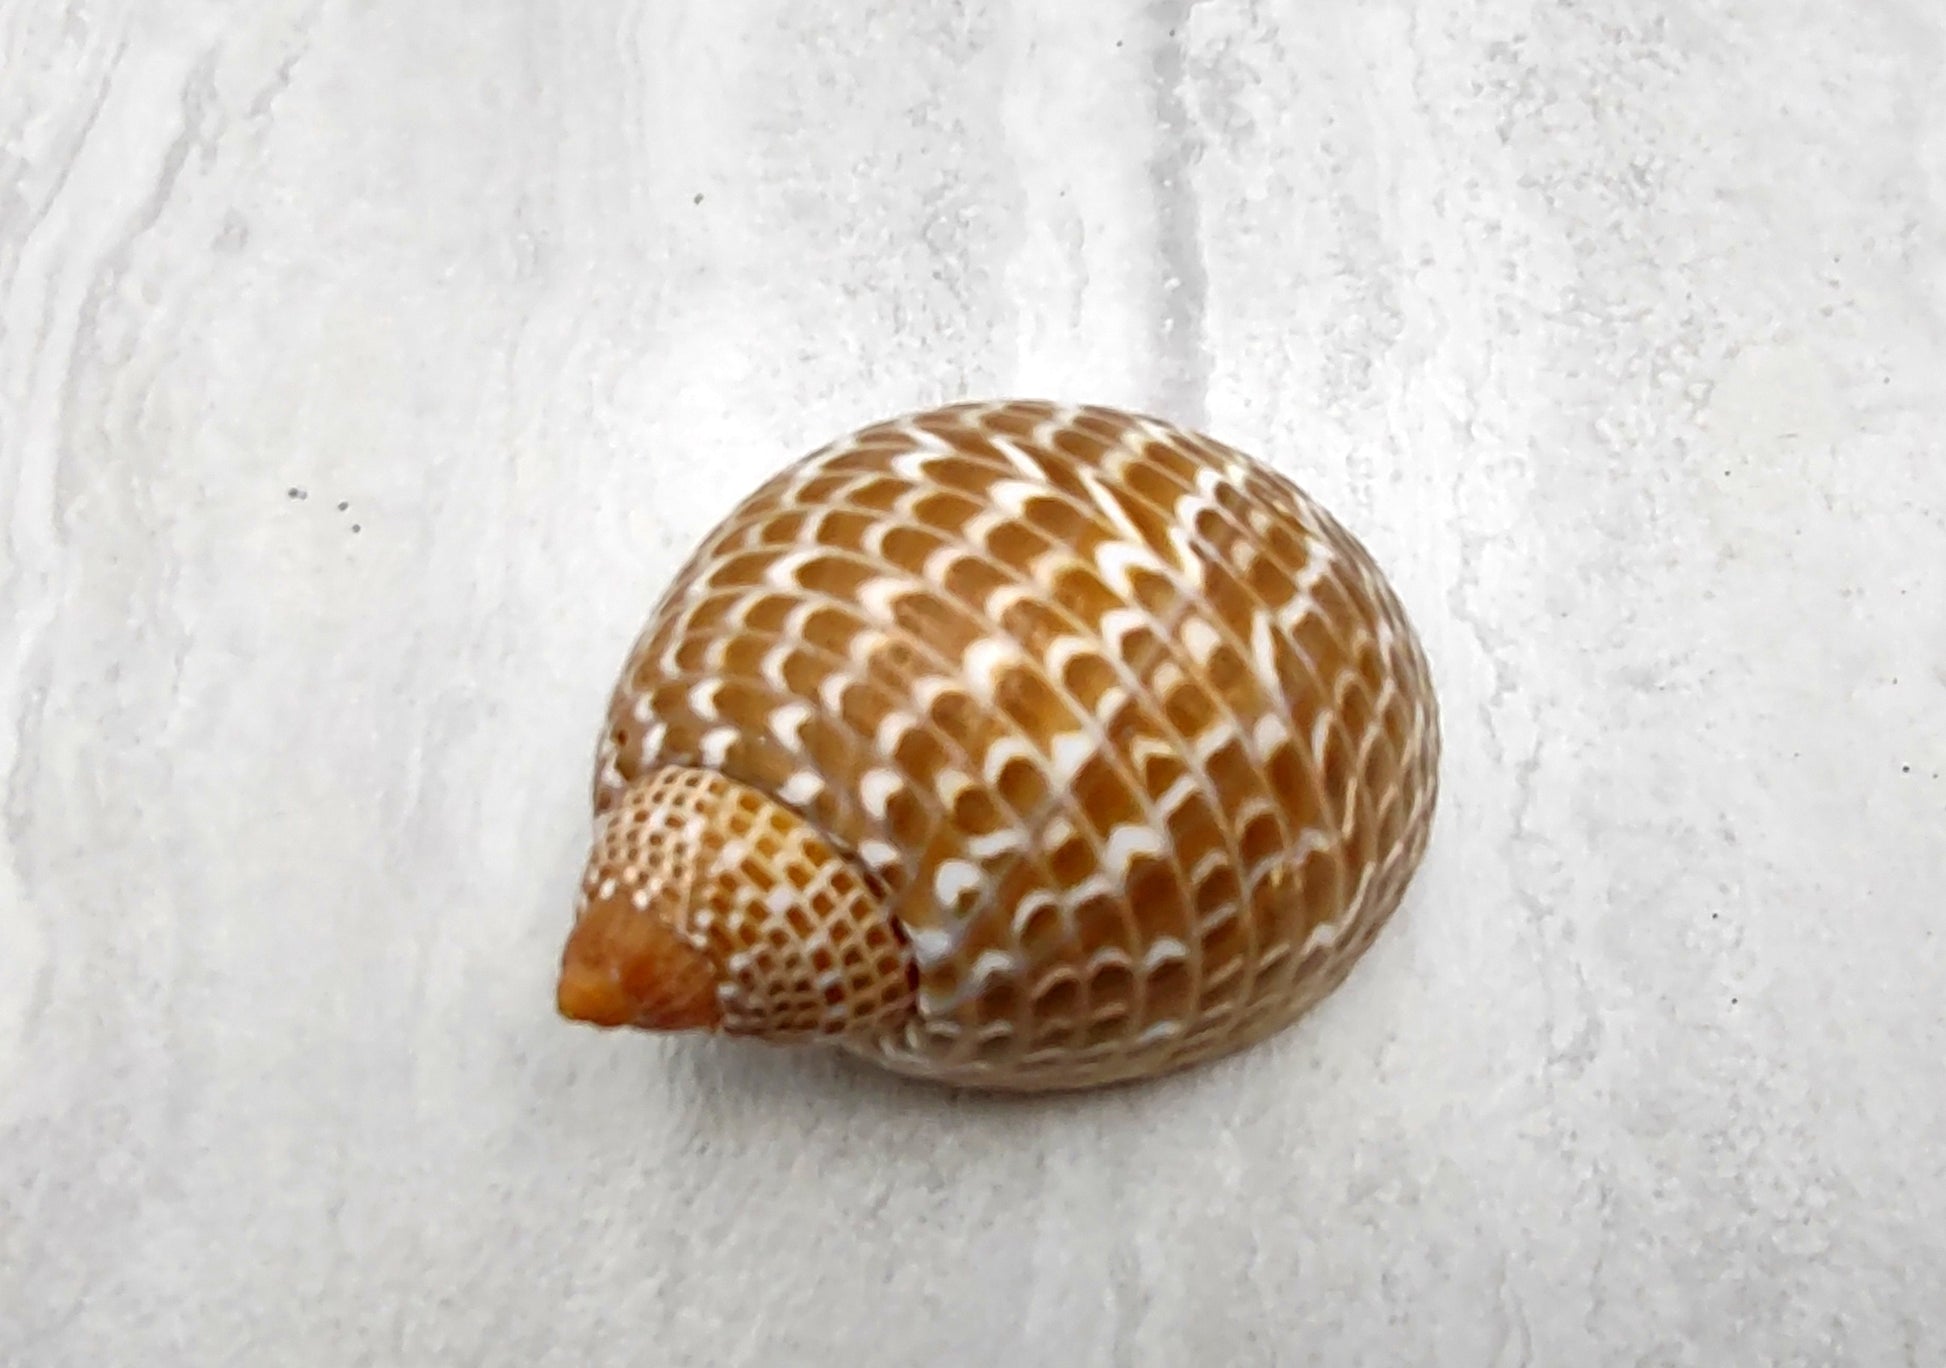 Pacific Partridge Tun Seashell (3-4 inches) - Tonna Perdix. Two brown and white shells, one showing the spiral and design, the other showing the opening. Copyright 2022 SeaShellSupply.com.